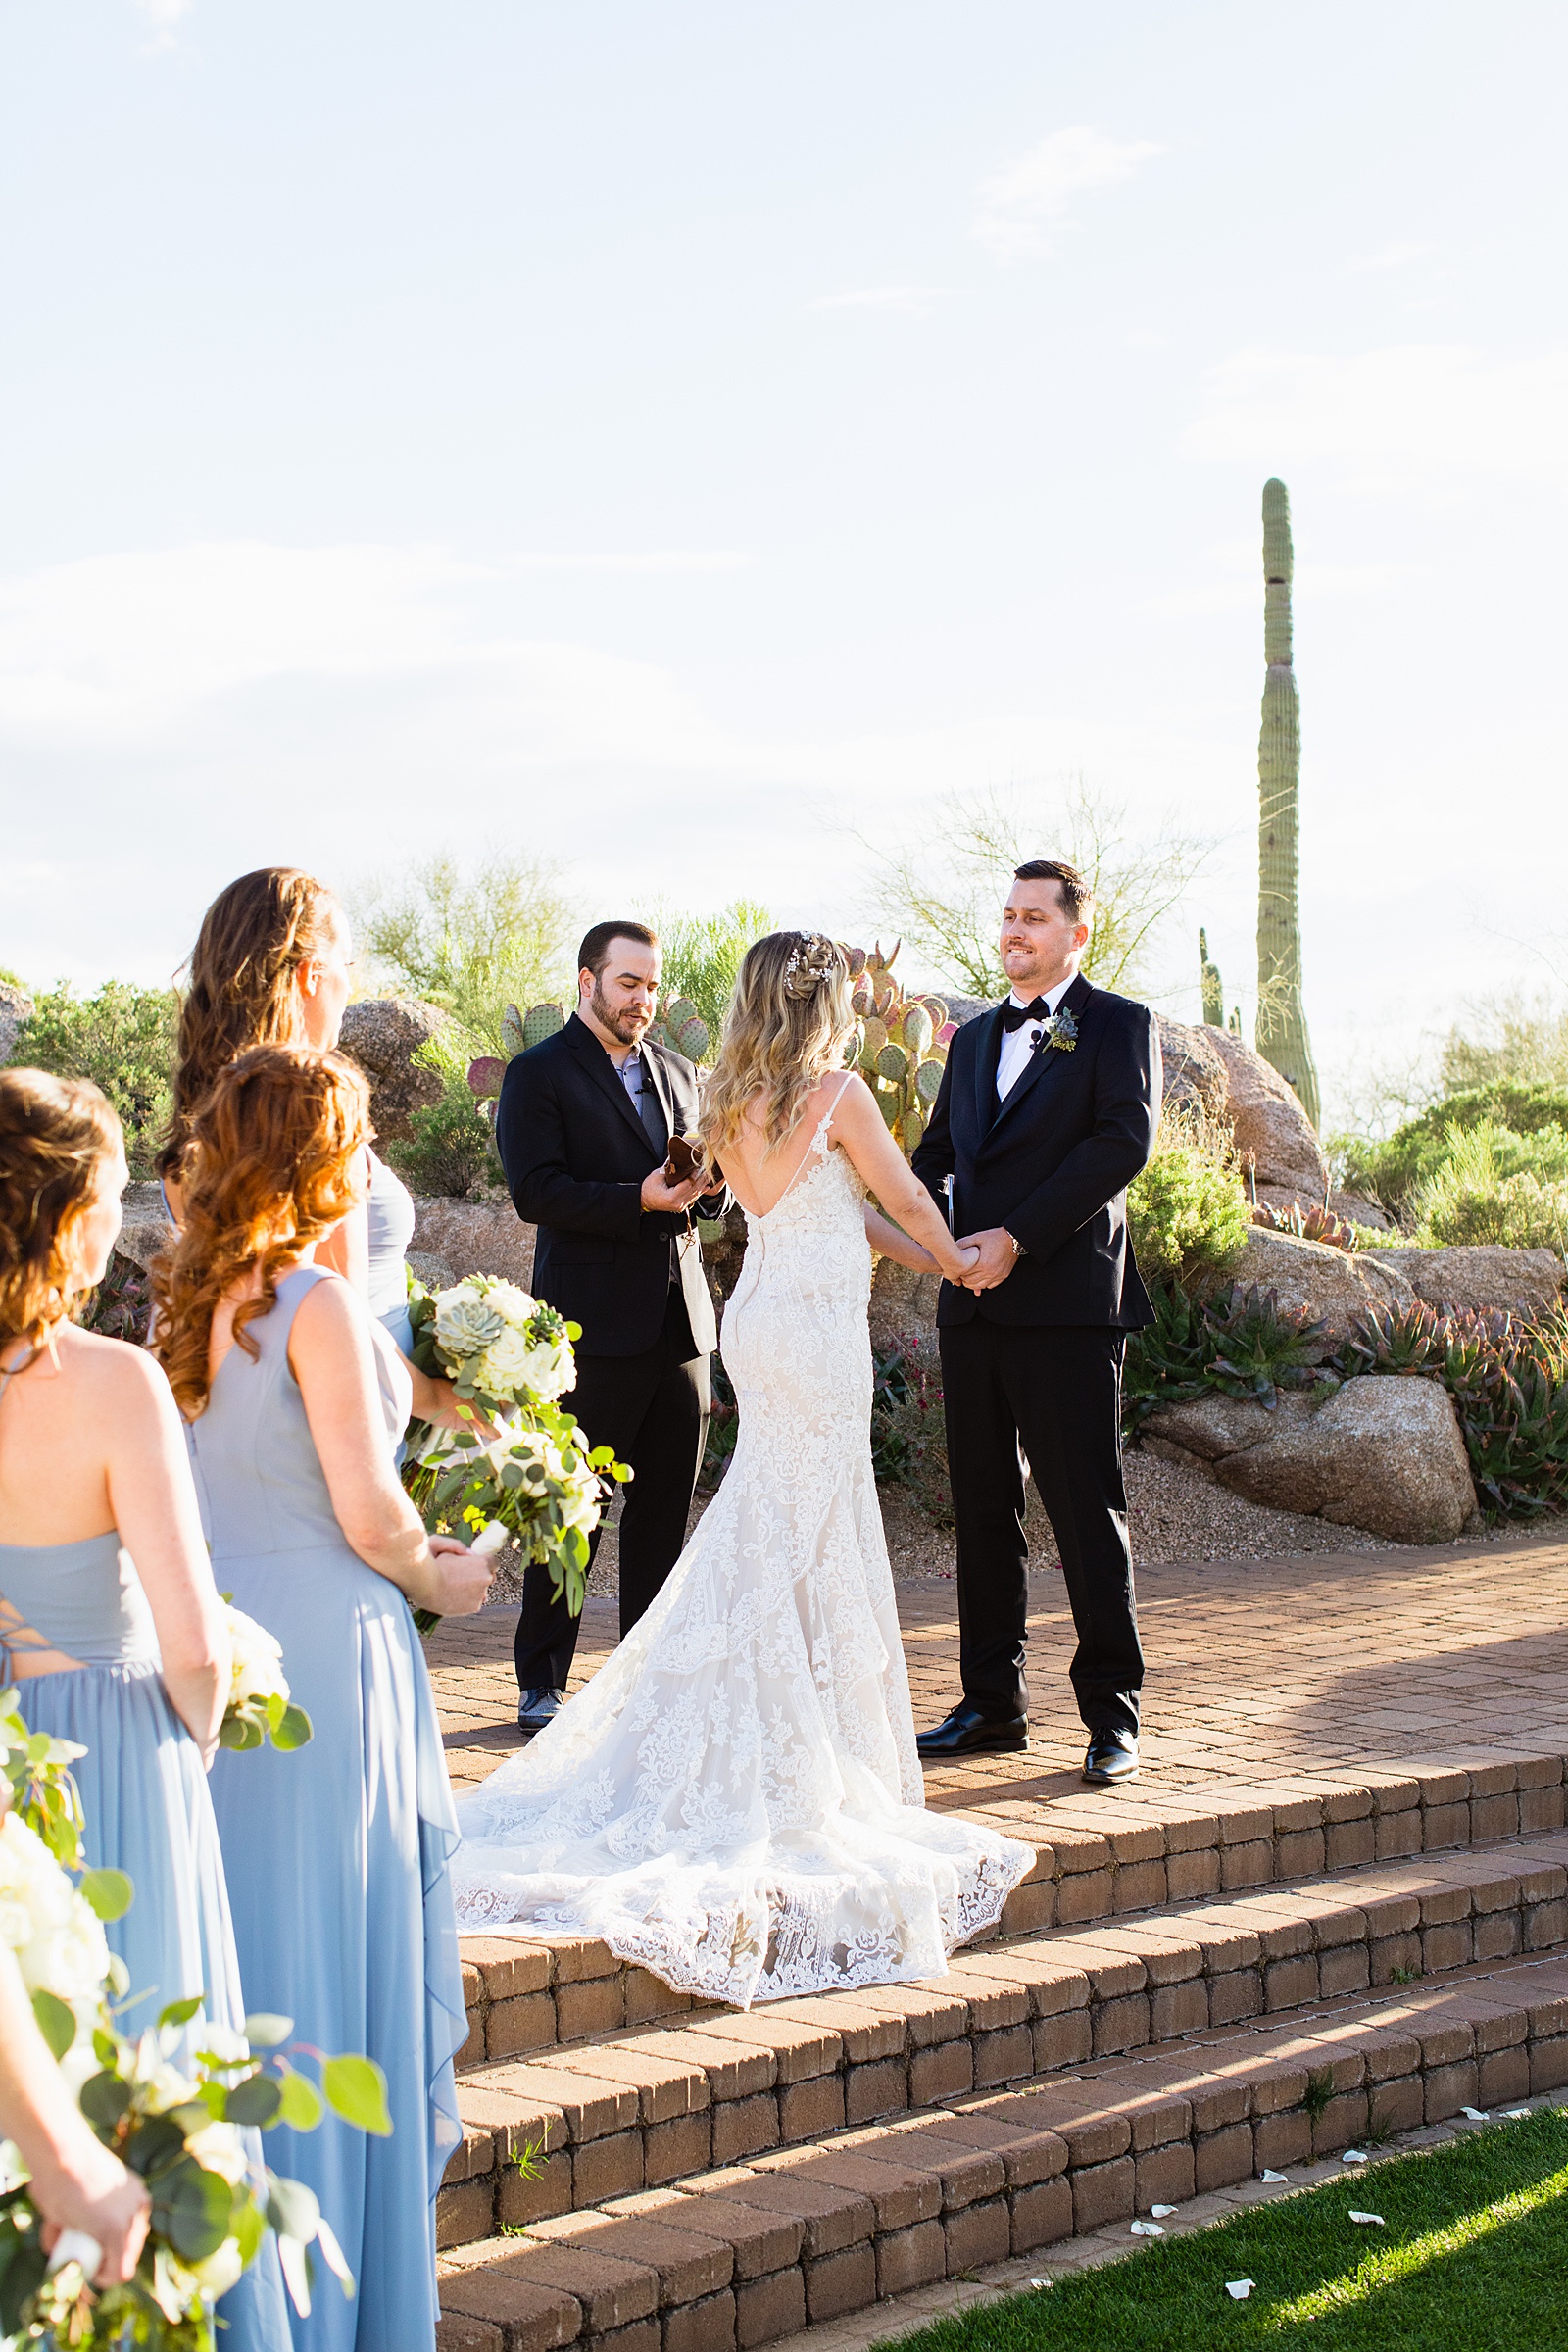 Groom looking at his bride during their wedding ceremony at Troon North by Scottsdale wedding photographer PMA Photography.